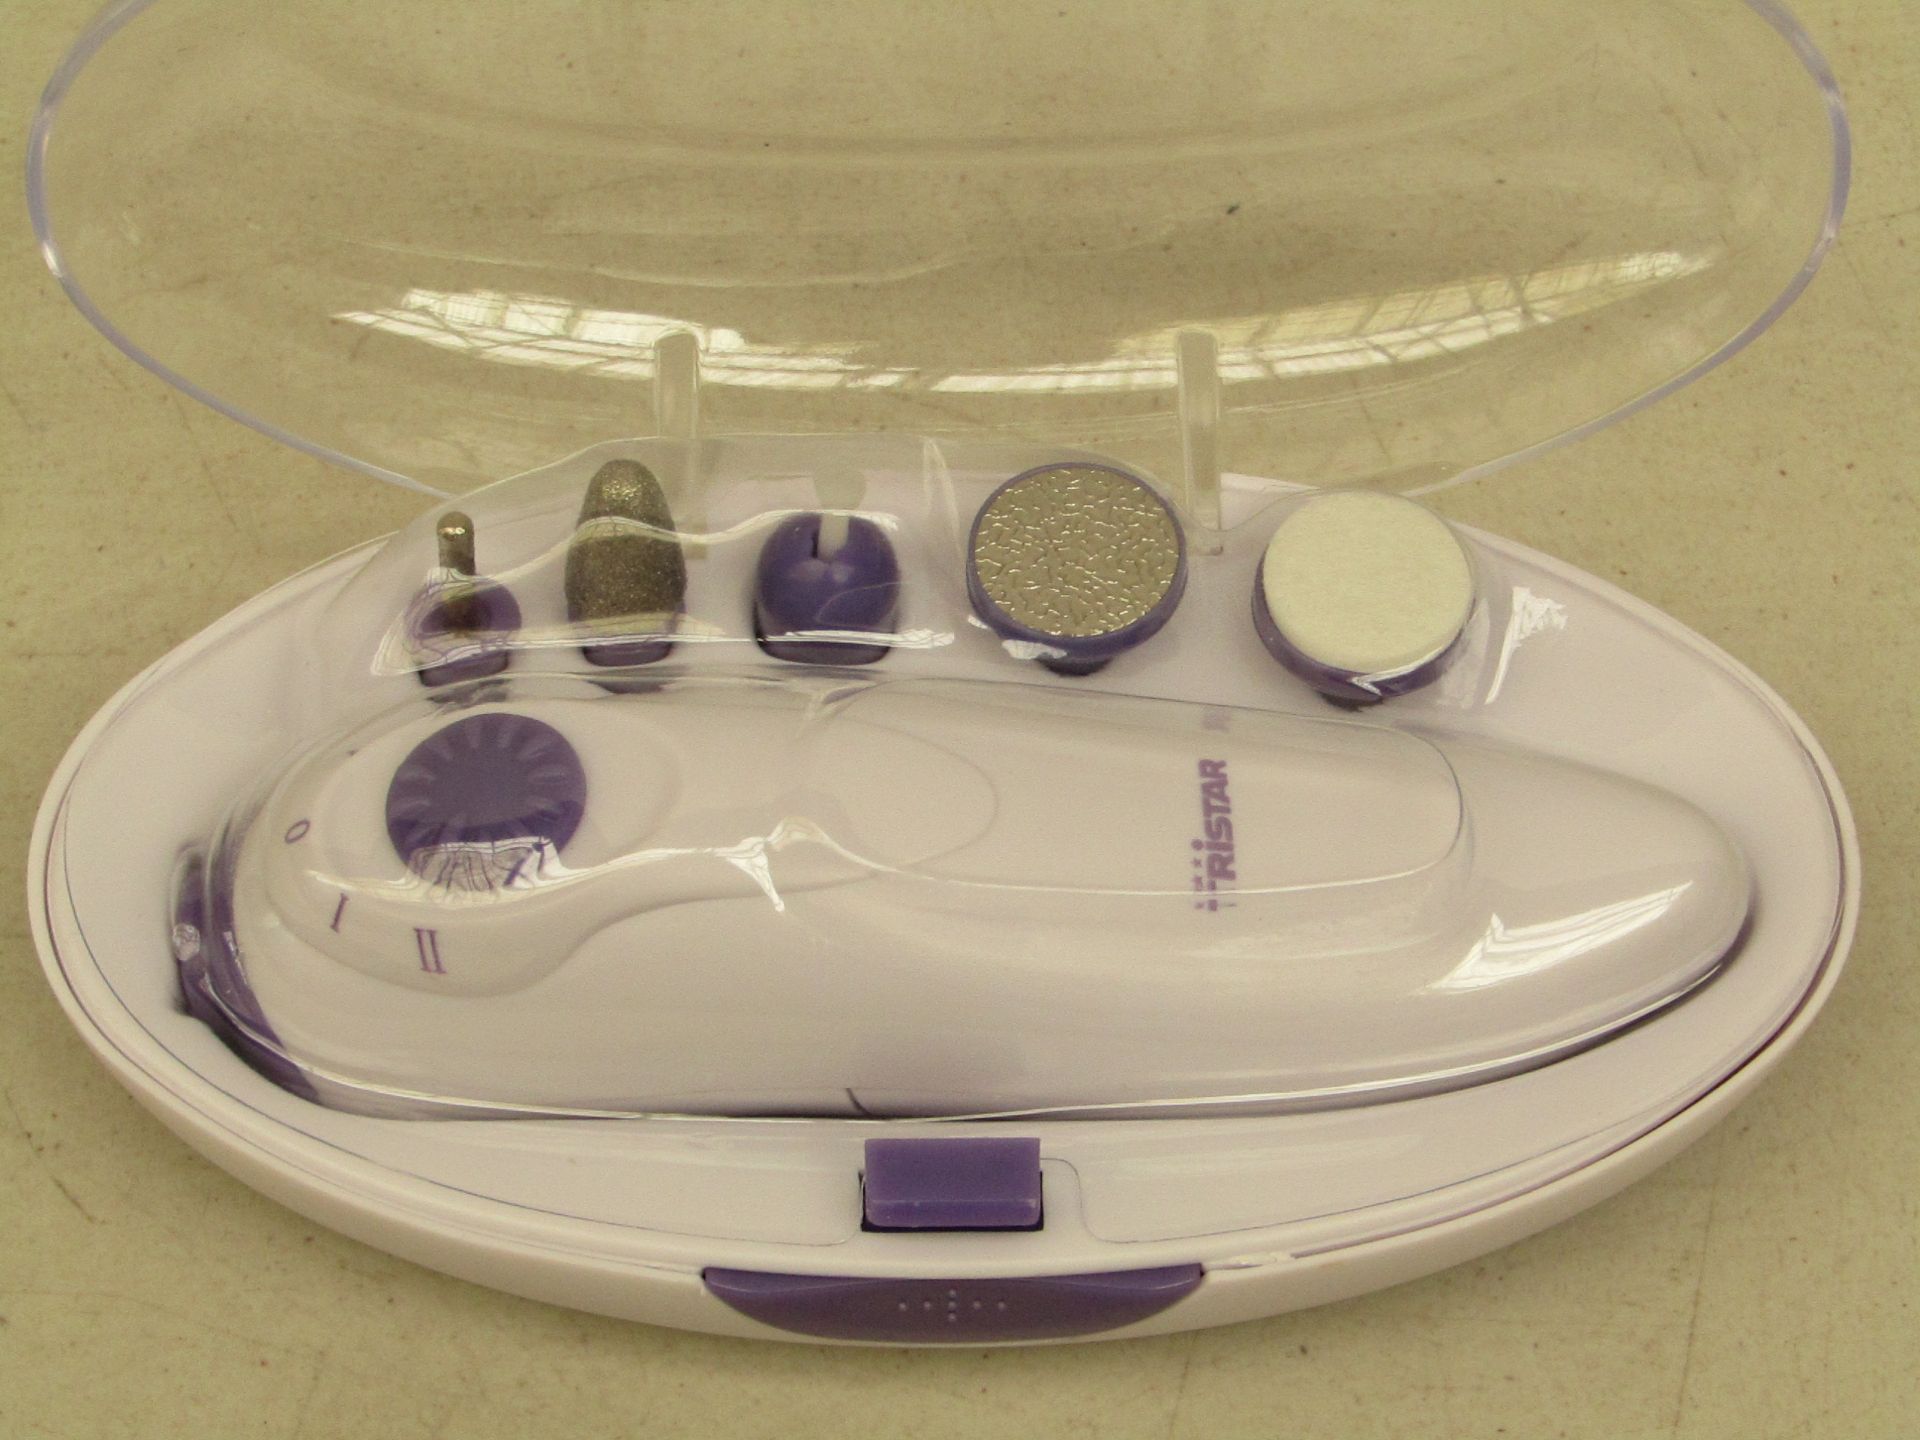 Tristar manicure and pedicure set, new and boxed.